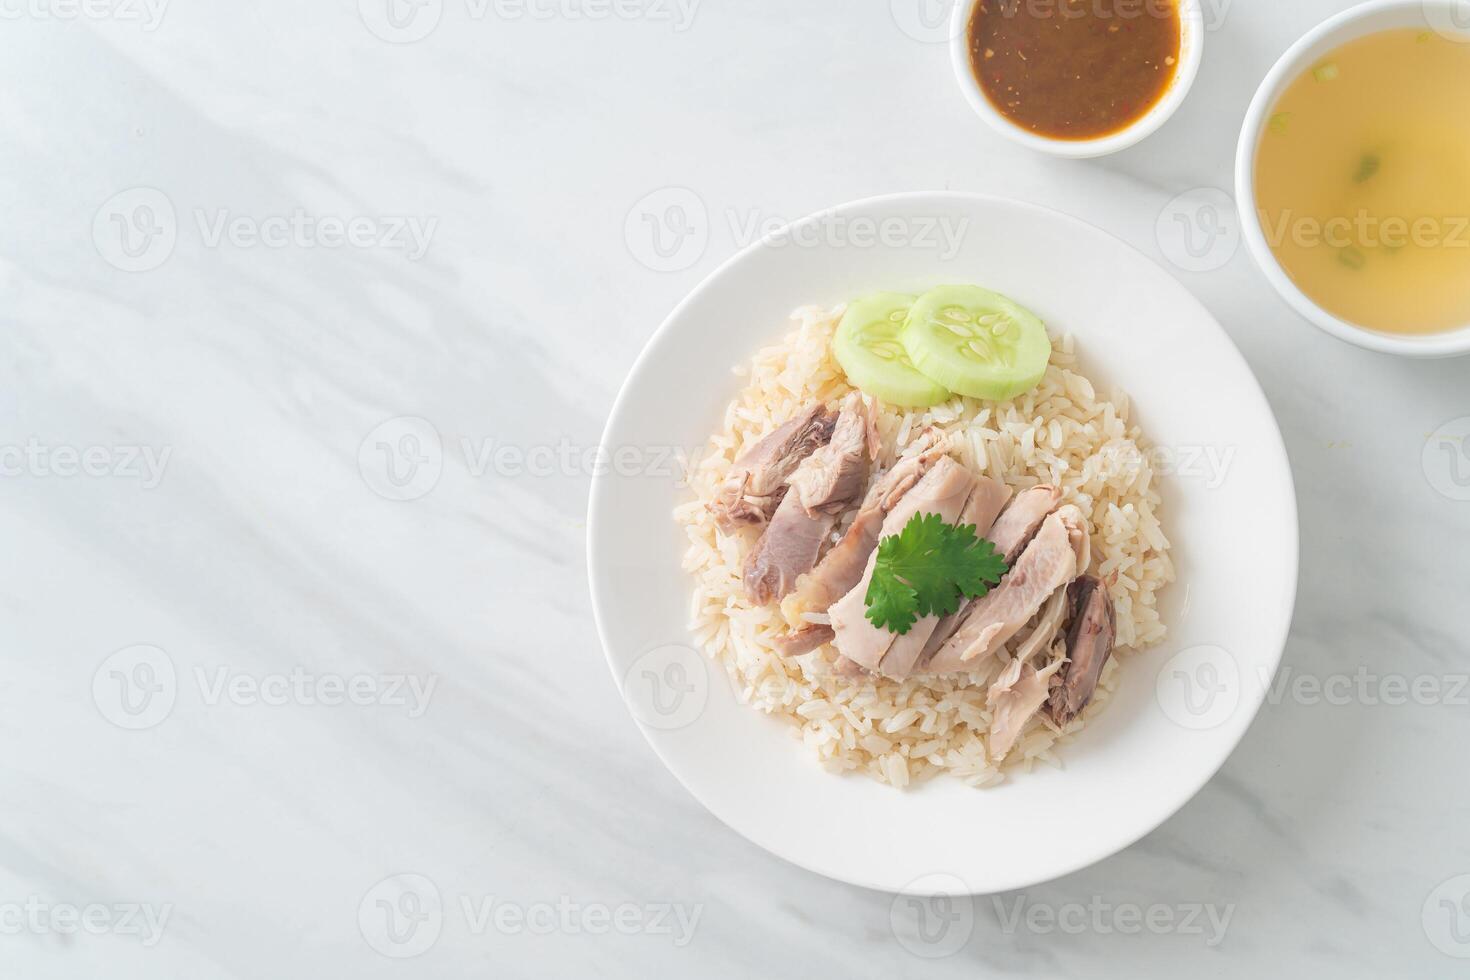 Hainanese Chicken Rice or steamed rice with chicken photo